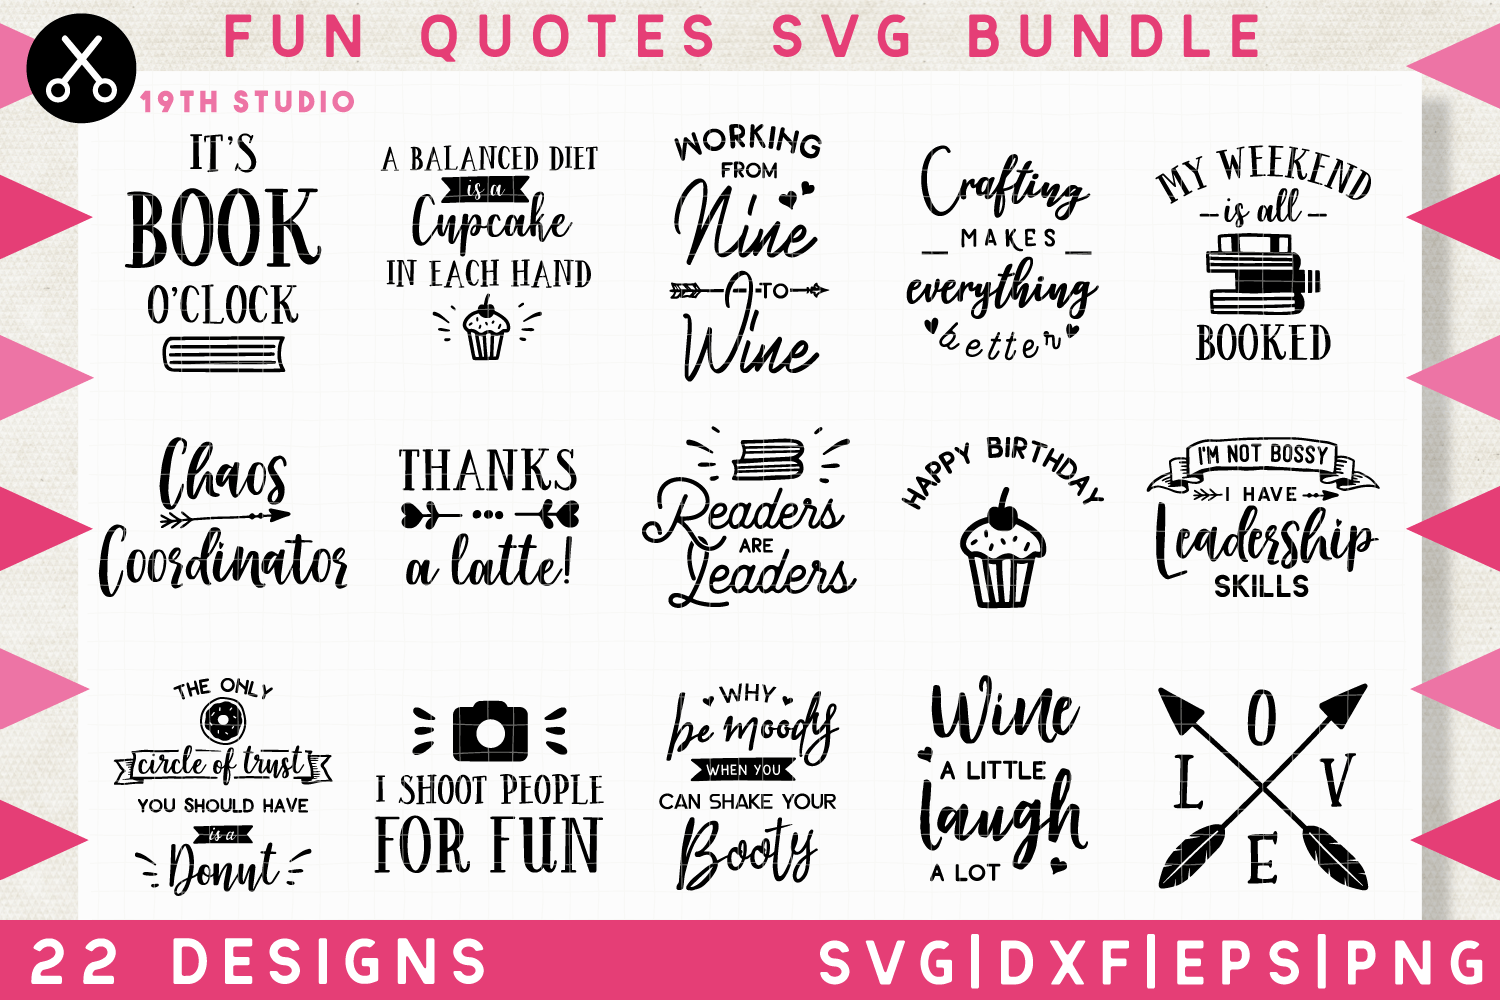 Fun Quotes SVG bundle - M10 Craft House SVG - SVG files for Cricut and Silhouette